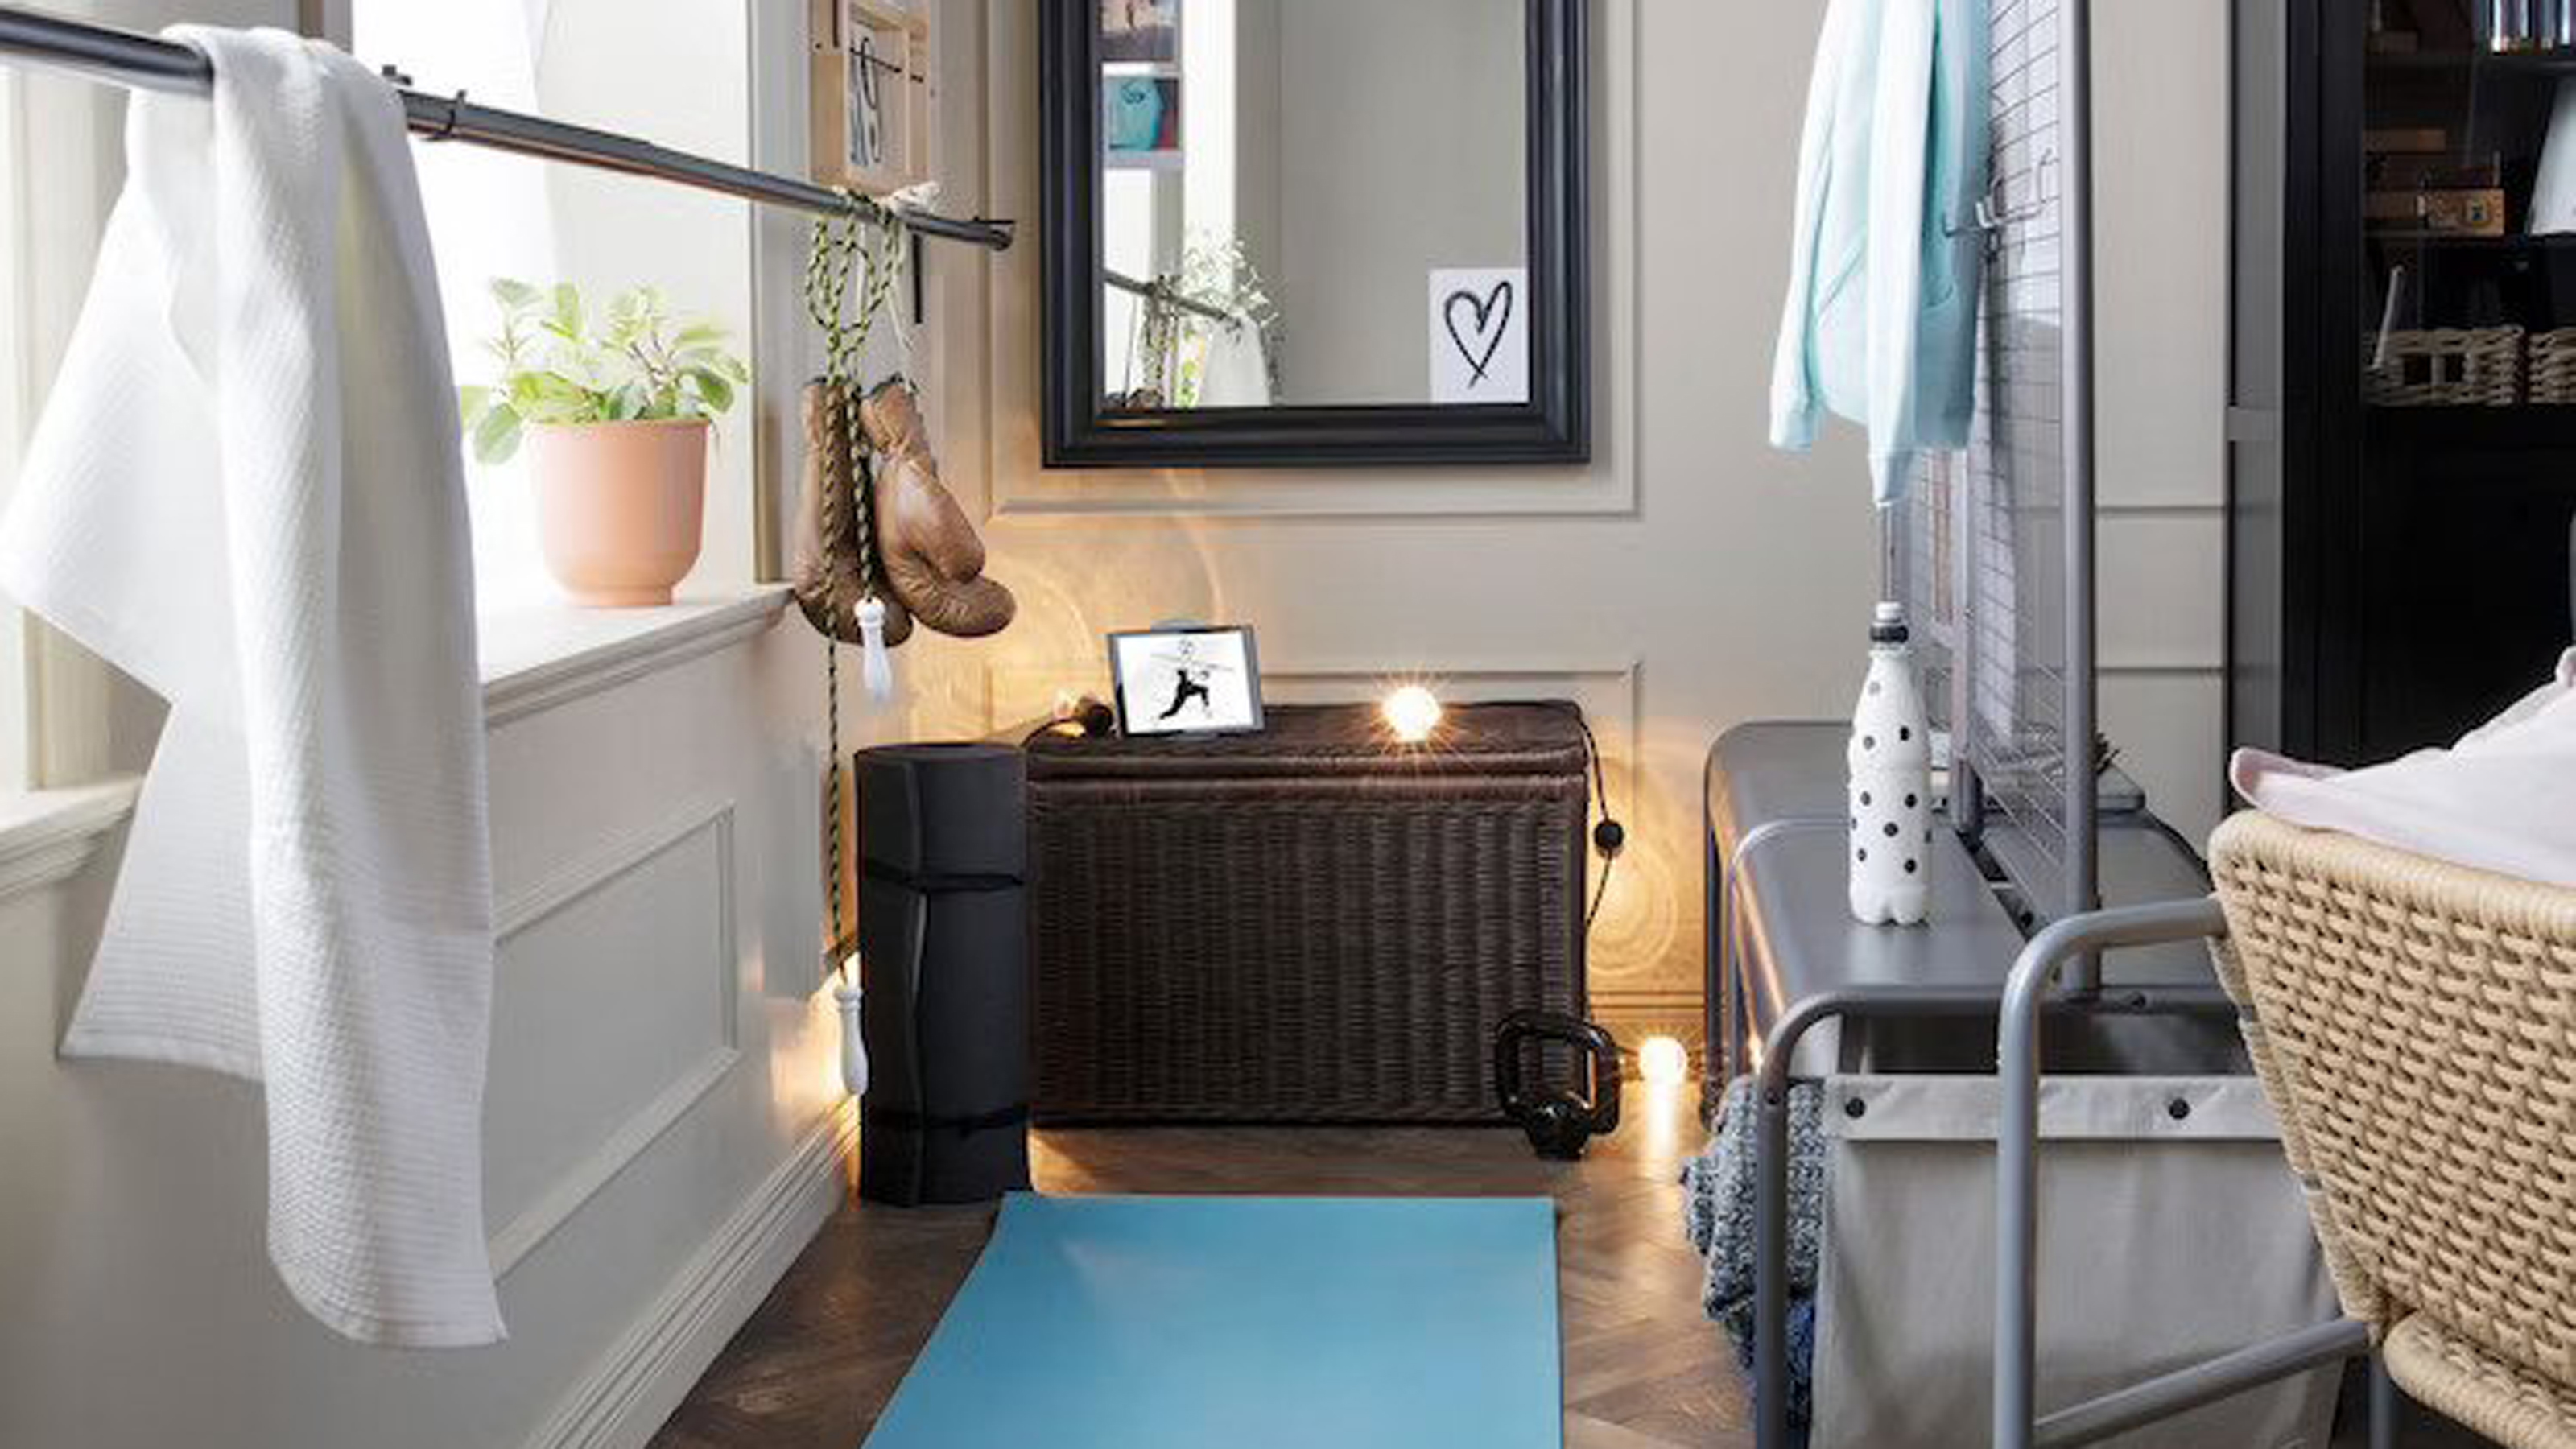 11 Gym Storage Solutions That Are Both Stylish And Practical | Real Homes